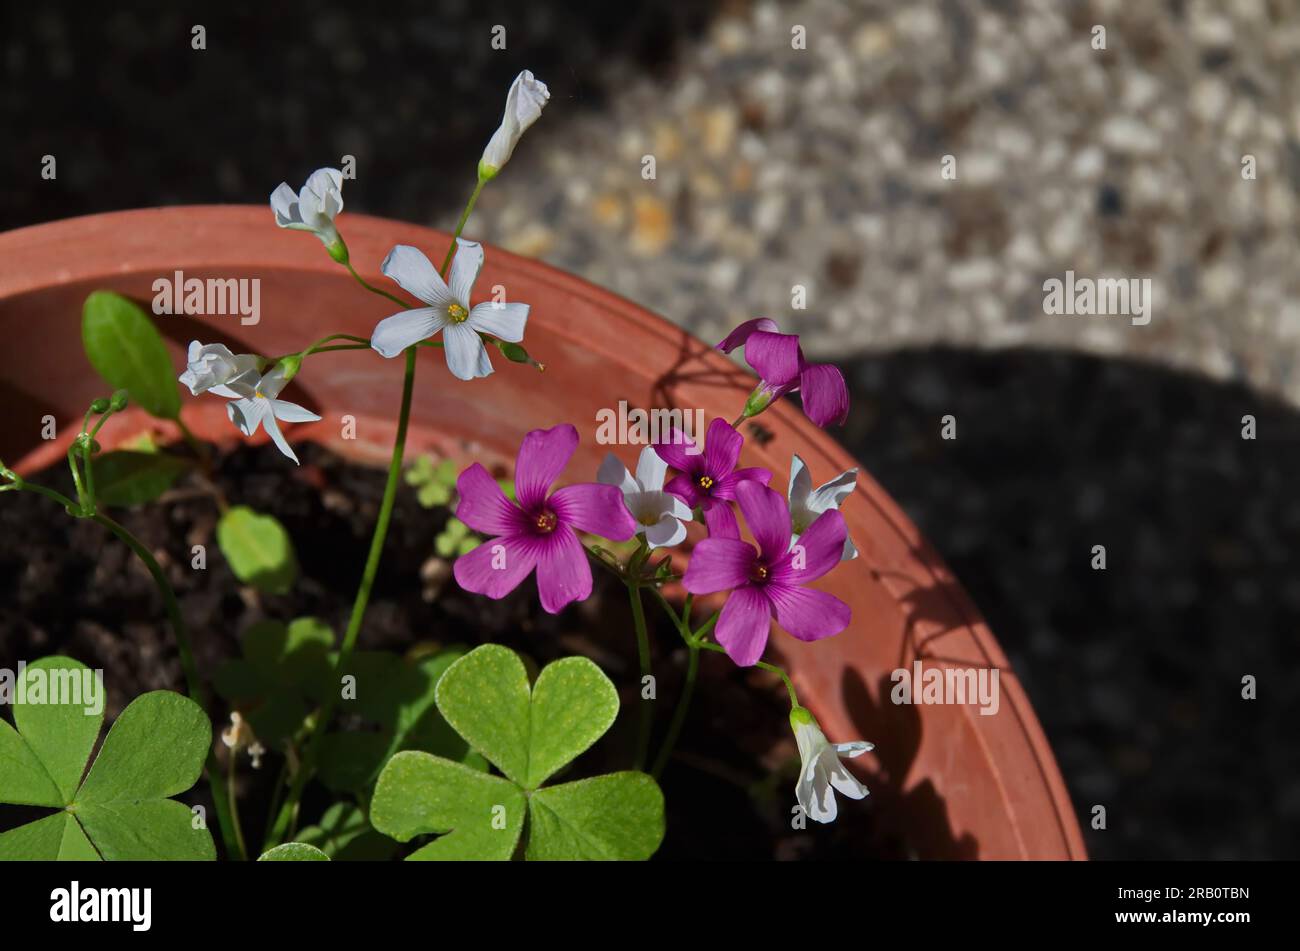 Close-up of Oxalis articulata blooming with white and pink flowers, Sofia, Bulgaria Stock Photo